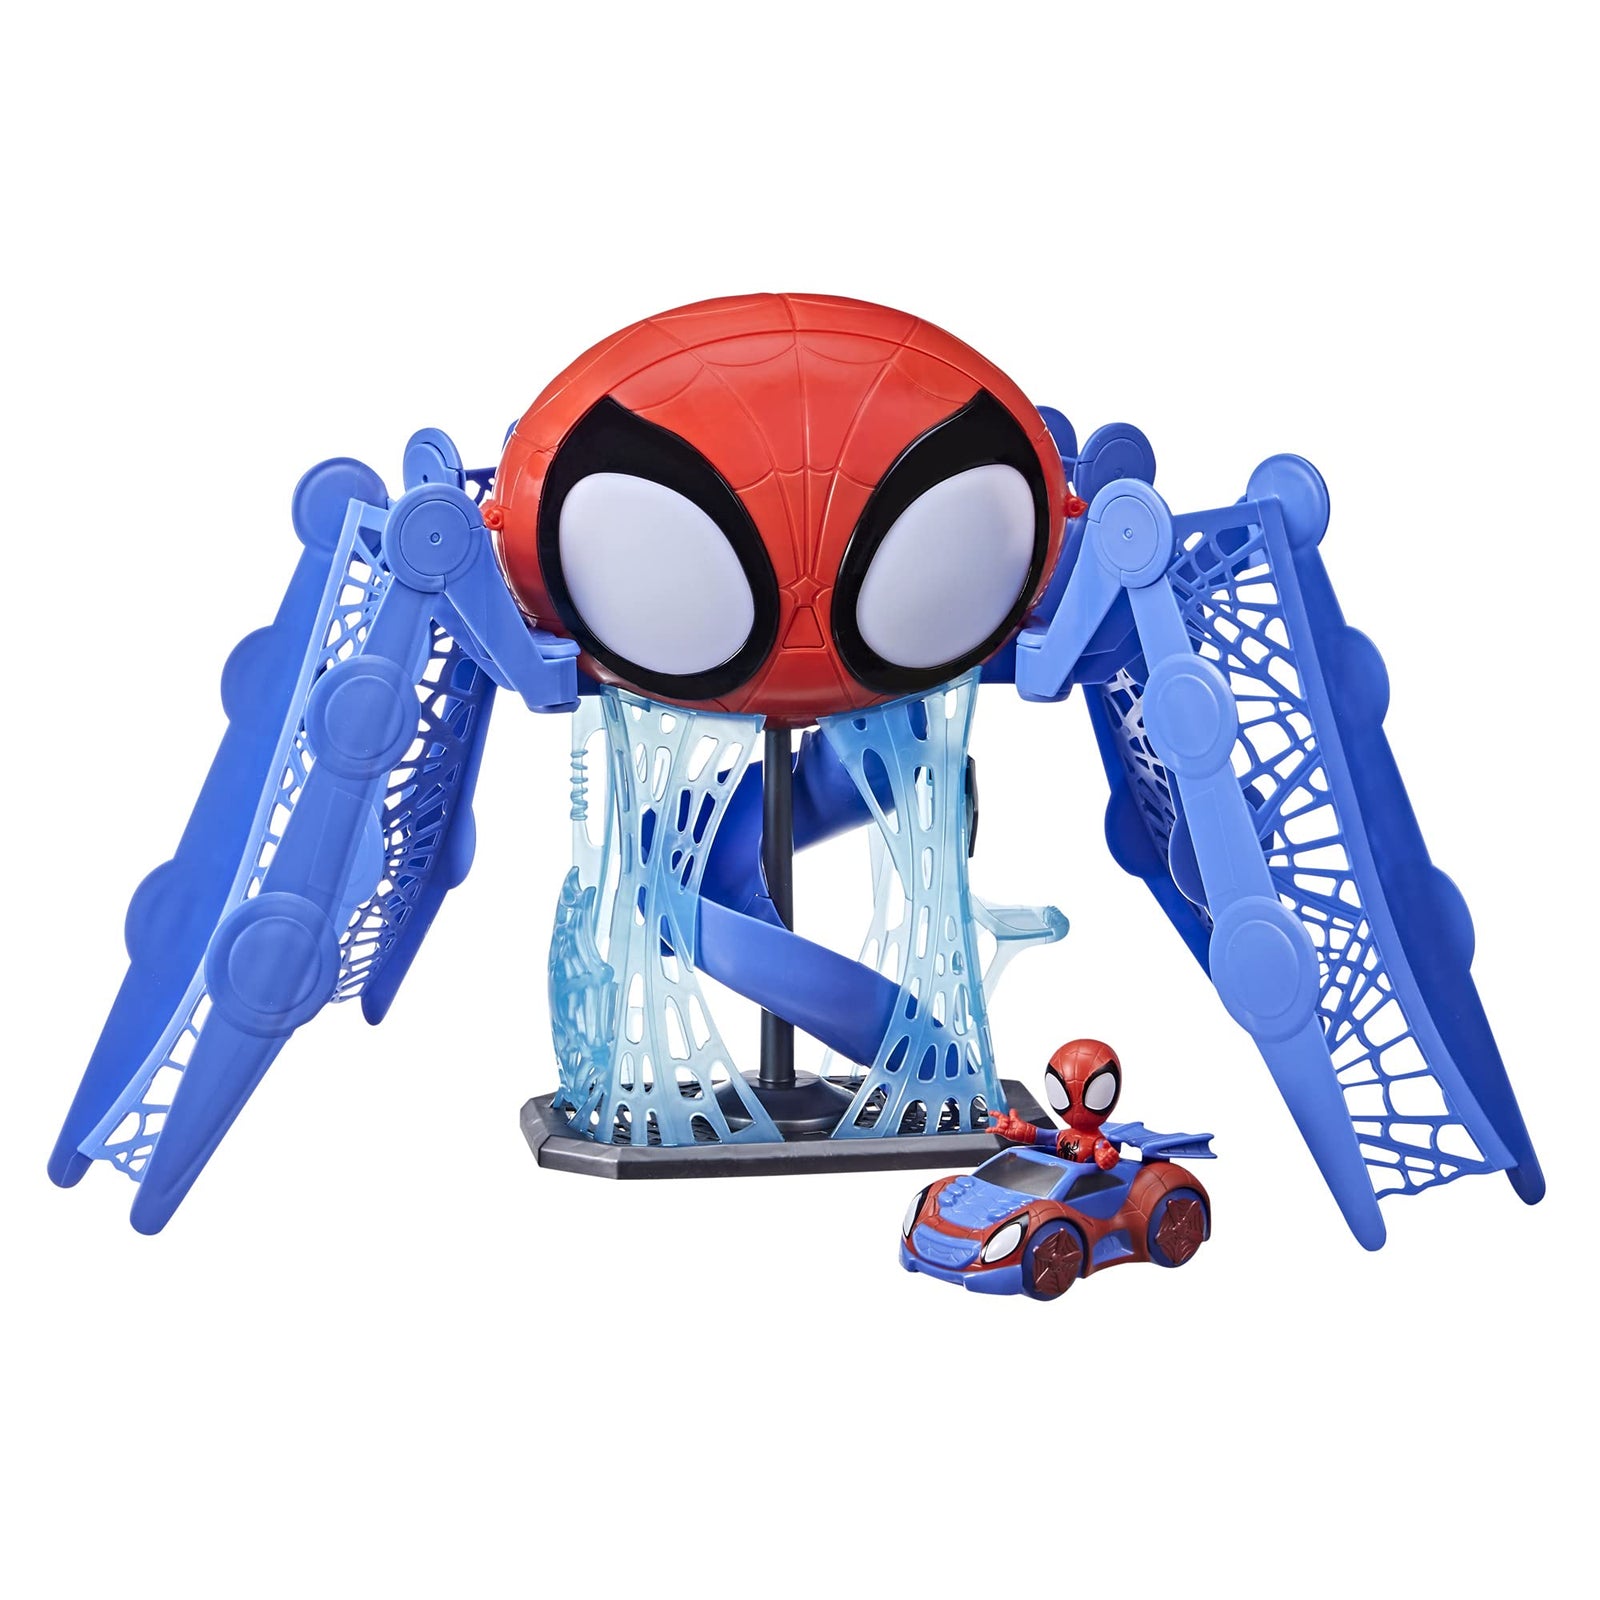 Marvel Spidey and His Amazing Friends Web-Quarters Playset with Lights and Sounds, Includes Spidey Figure and Vehicle, for Kids Ages 3 and Up